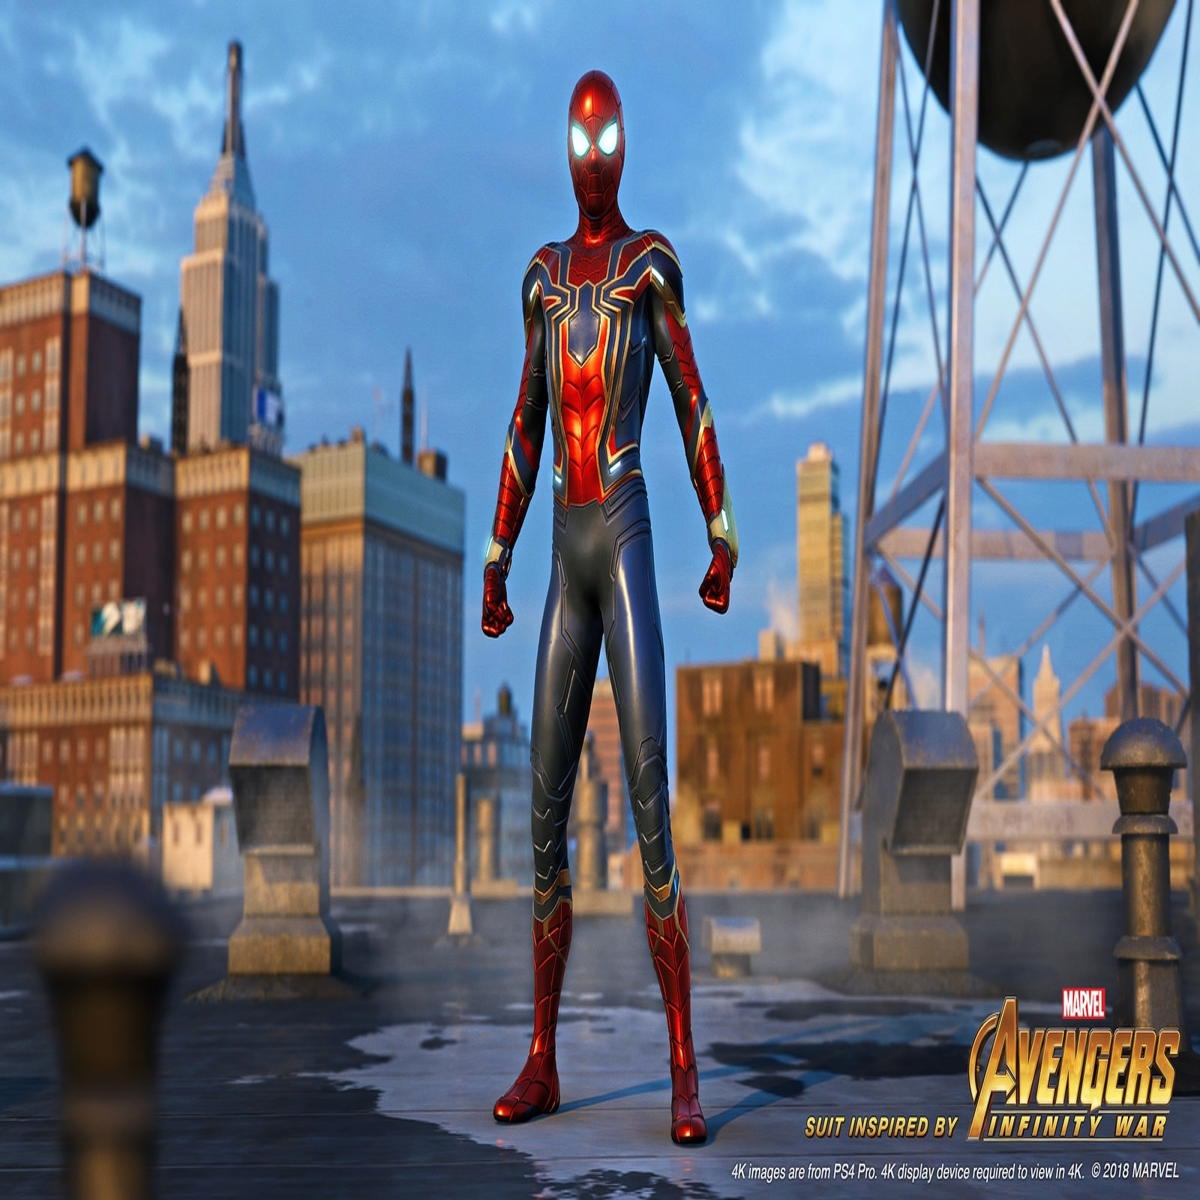 Spider-Man PS4 gets the cool Iron Spider suit from Avengers ...